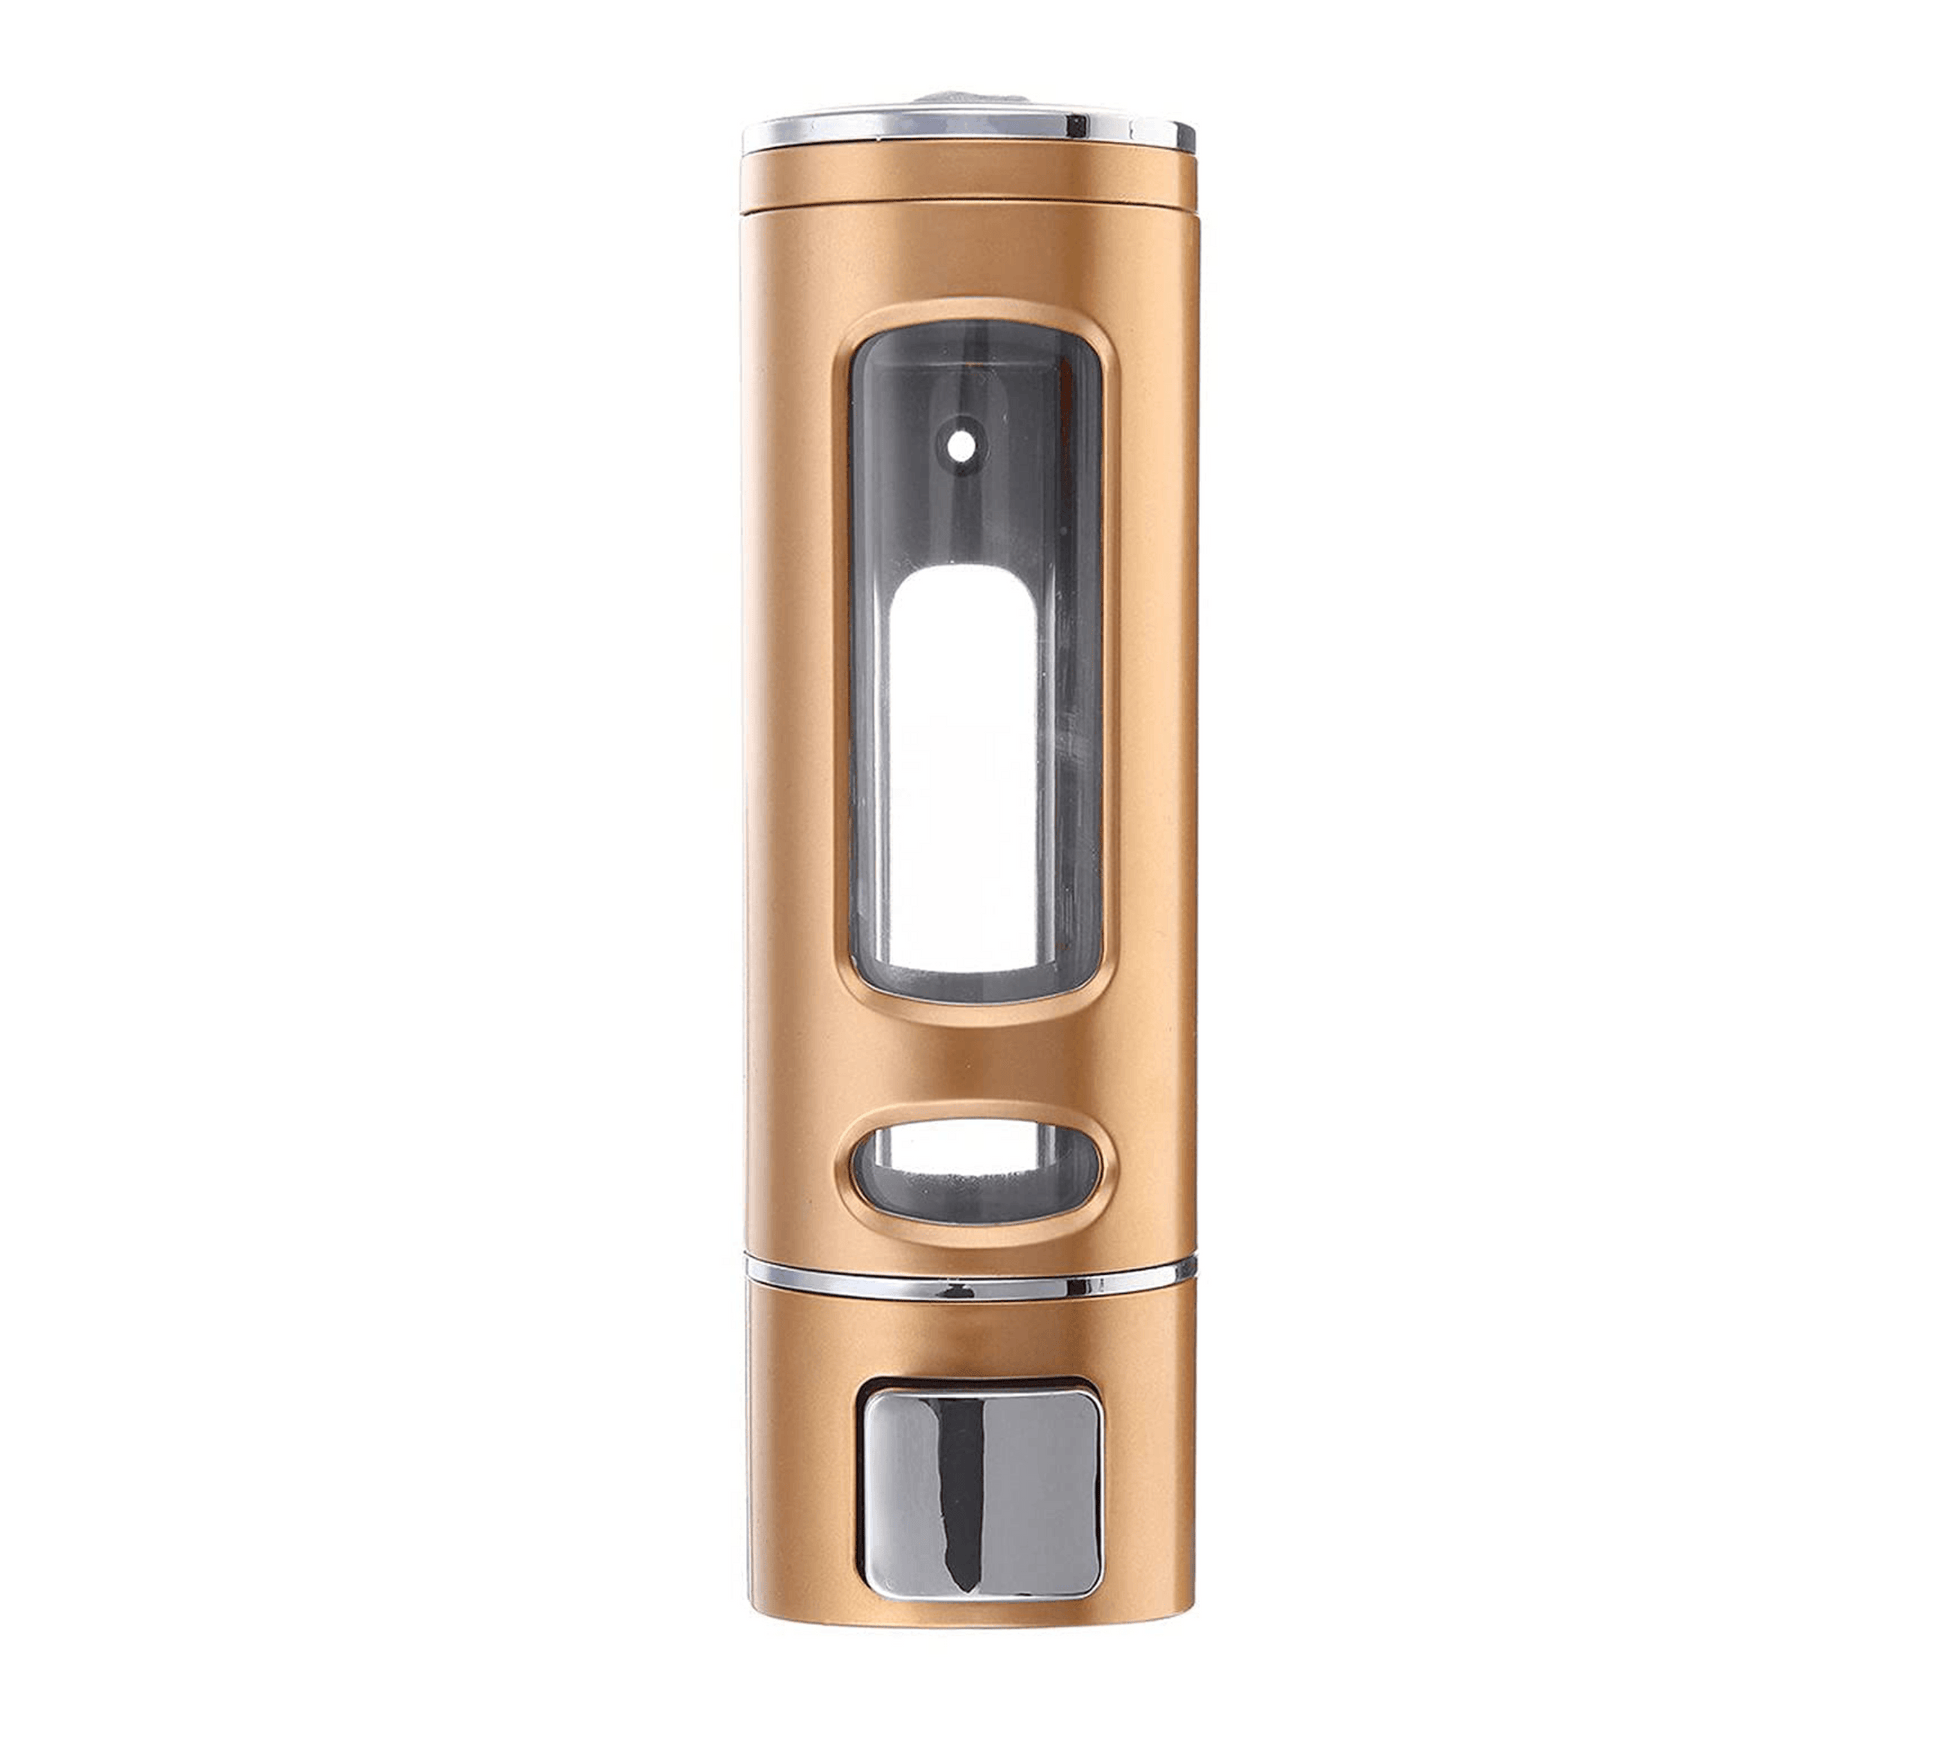 Fossa Wall-Mount Soap Dispensers 400ML Manual Soap Bathroom for Hair Shampoo Shower or Hand Cleanser SD-005 Gold - Fossa Home 